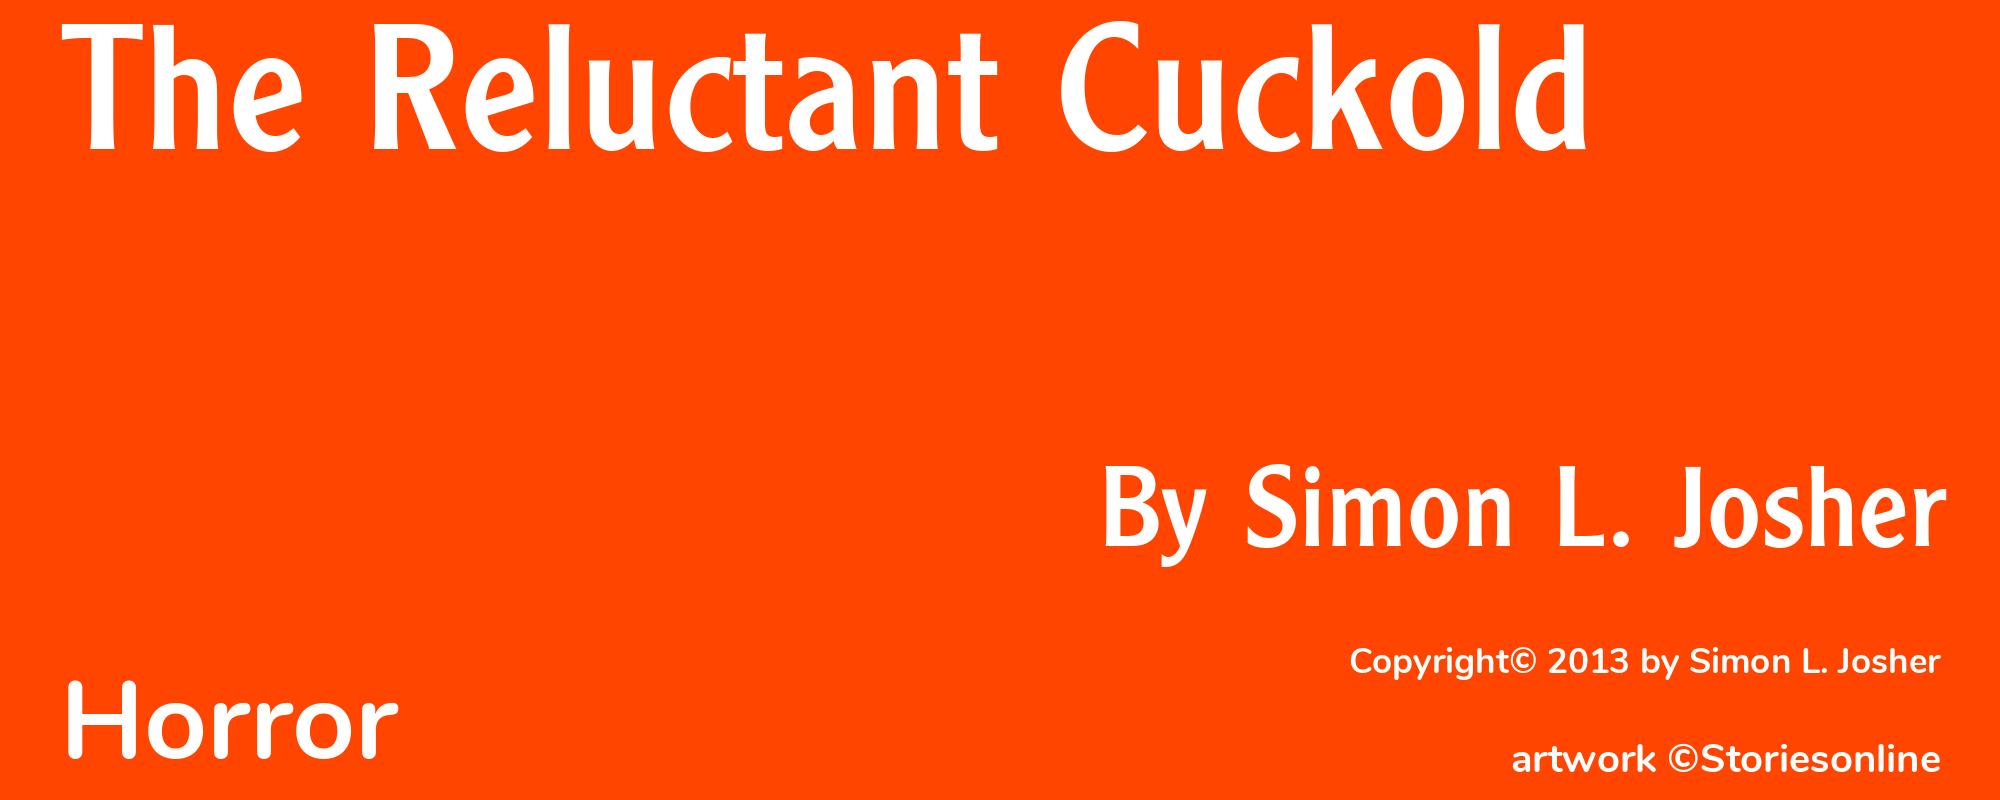 The Reluctant Cuckold - Cover